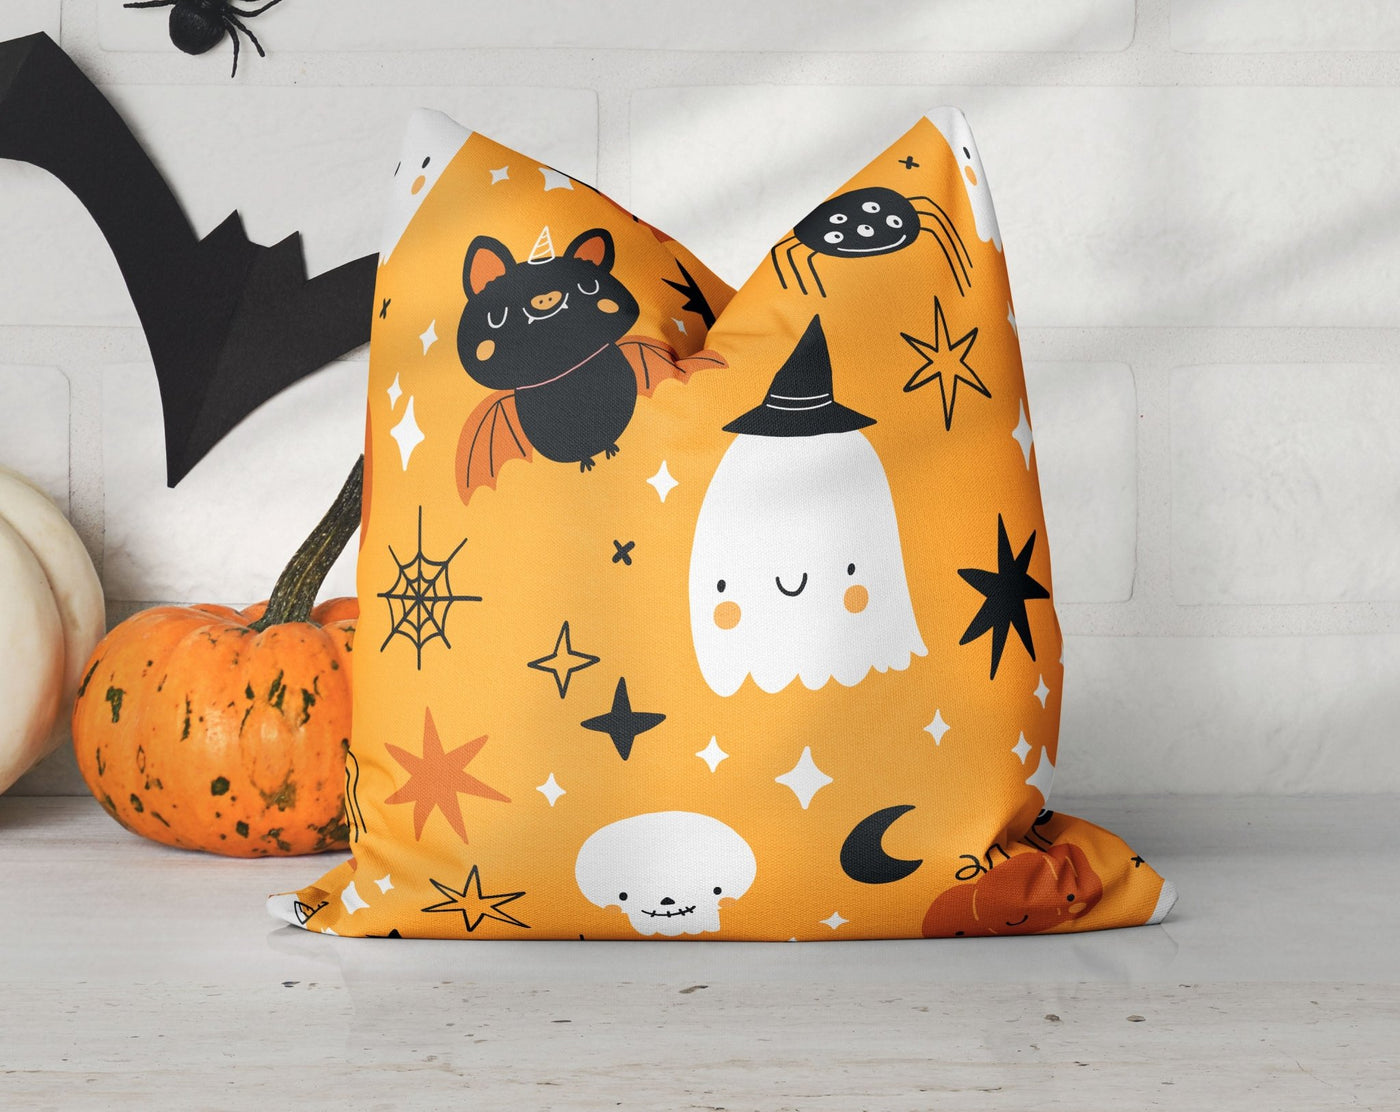 Happy Halloween Shy Ghosts and Bats with Pumpkin and Candy Orange Pillow Throw Cover - Cush Potato Pillows